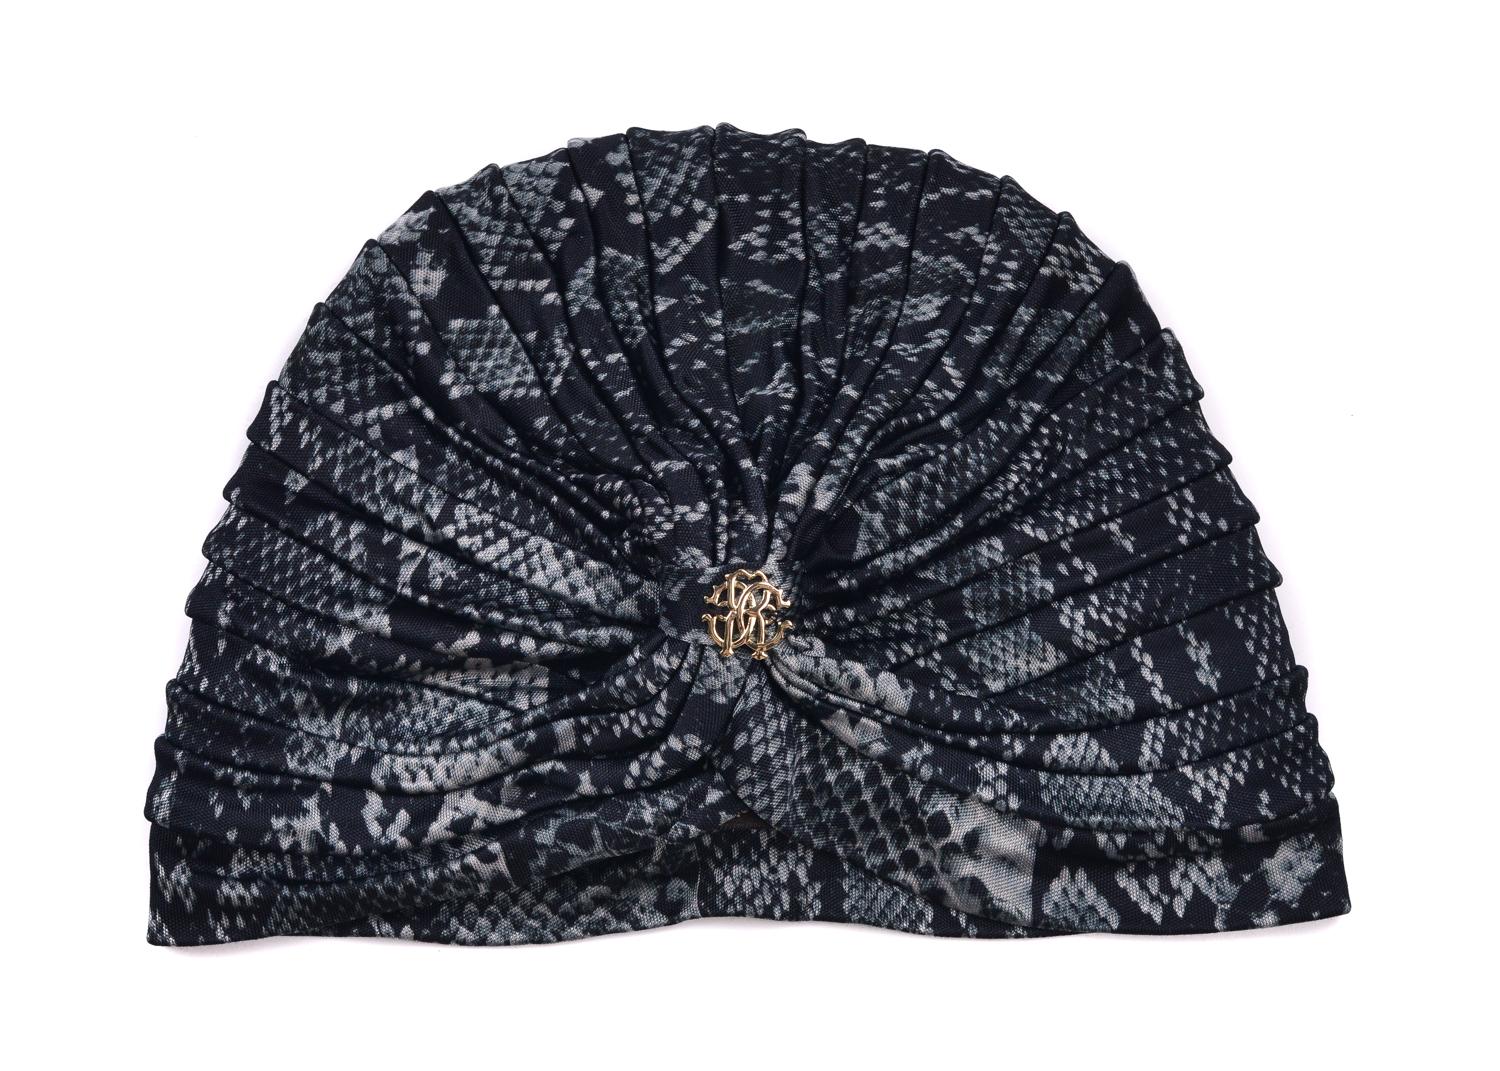 Be one with your wild artisan side with Roberto Cavalli's Snake Print Tiered Turban. This head piece features a grey and black snake print, centered gold RC Logo, and uniformly tiered body. You can dawn this evening beauty before or after that